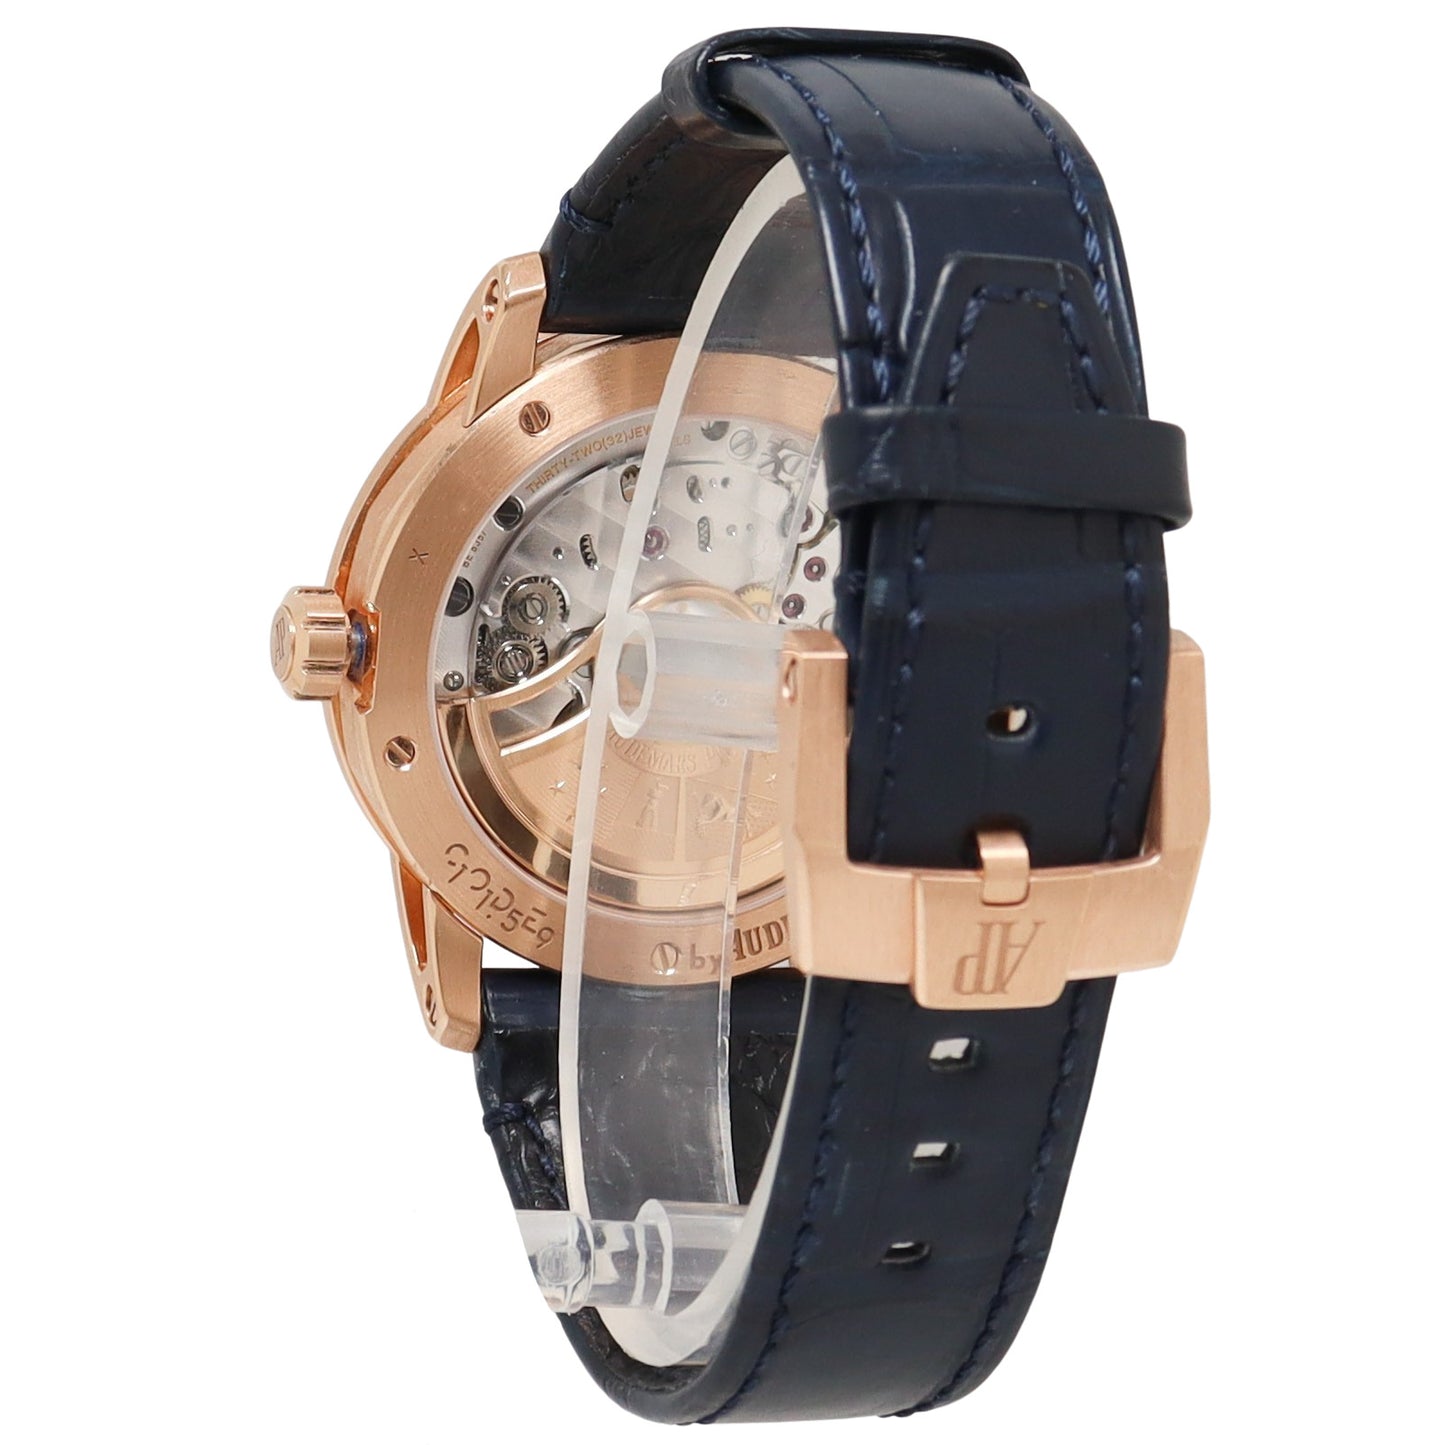 Audemars Piguet Code 11.59 Rose Gold 41mm Blue Arabic & Stick Dial Watch Reference# 15210OR.OO.A028CR.01